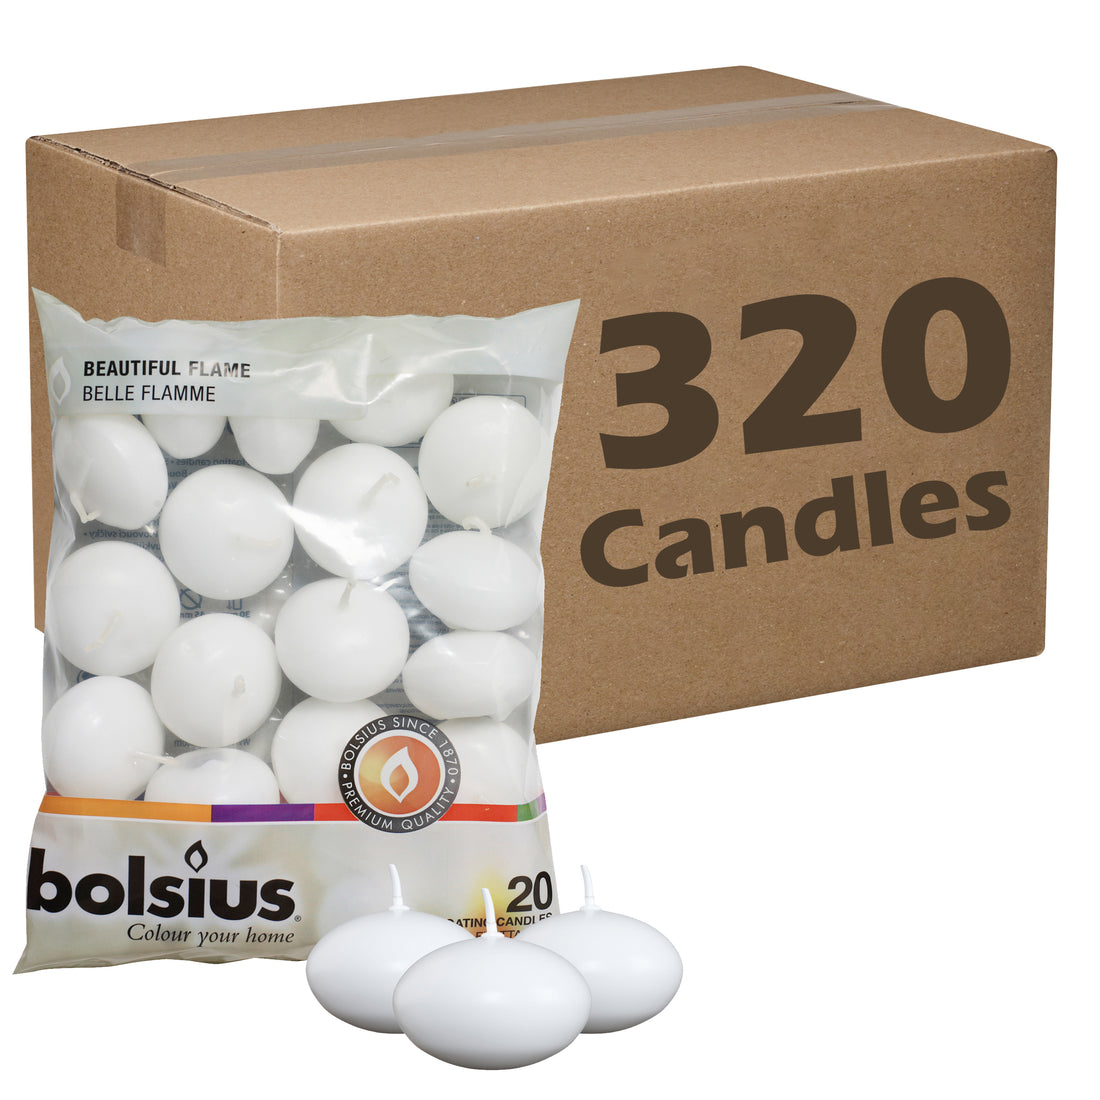 Copy of 1.75" X 1" Classic Bulk Floating Candles - 320 Pack